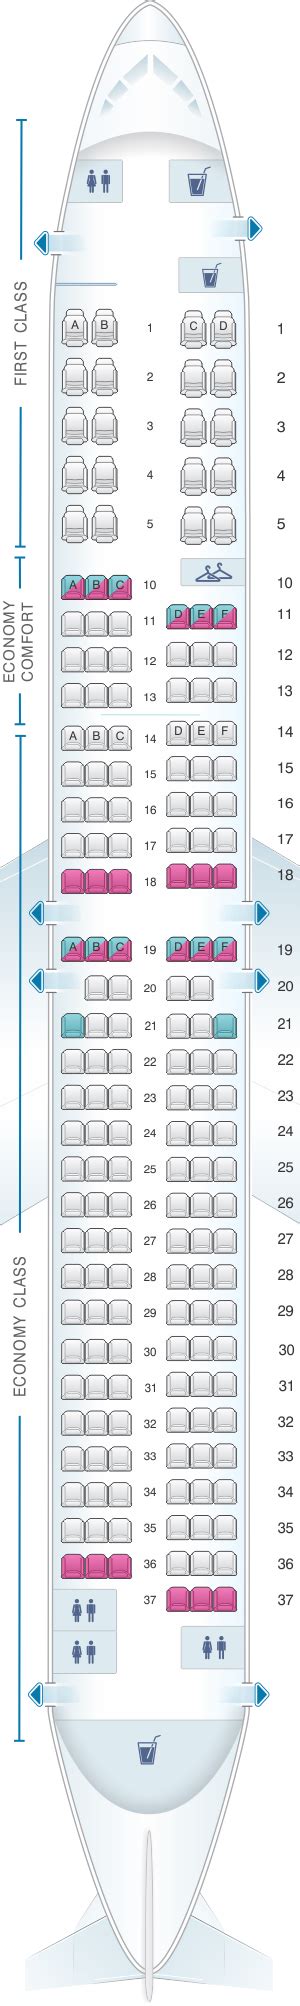 For your next Delta flight, use this seating chart to get the m